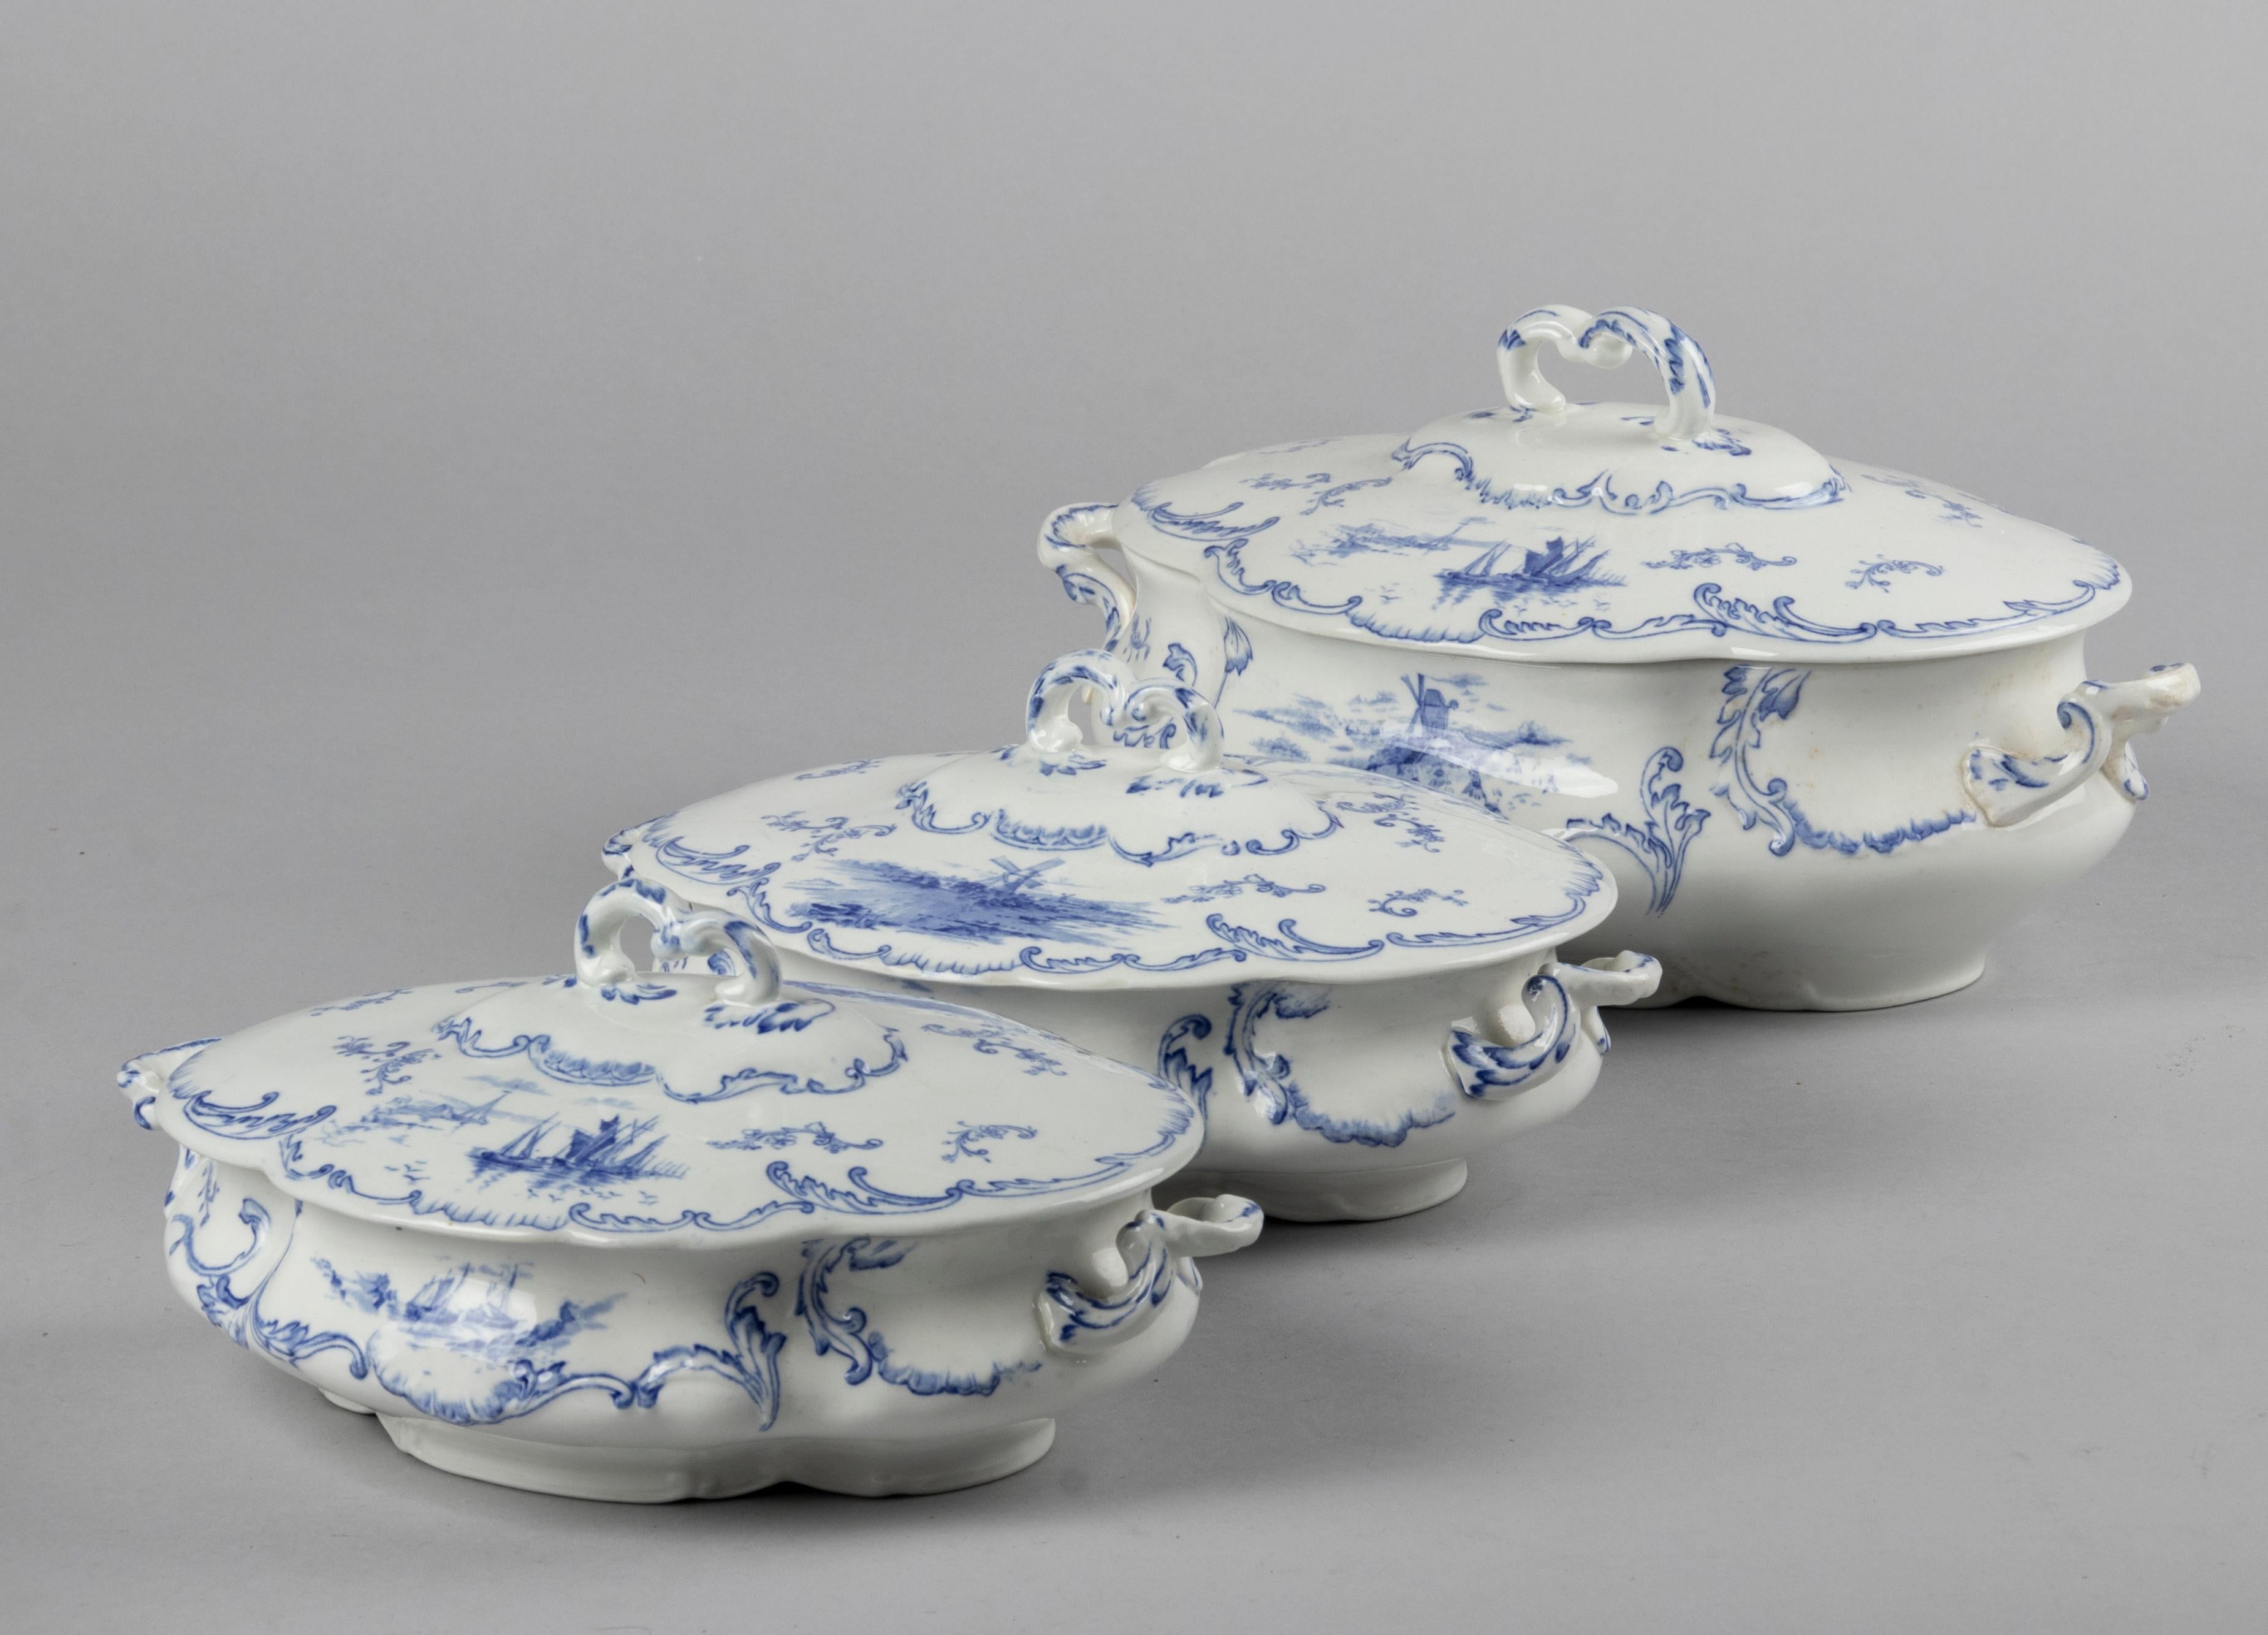 Ironstone 44-Piece Antique Dinner Service by Ridgways England in Delft Pattern